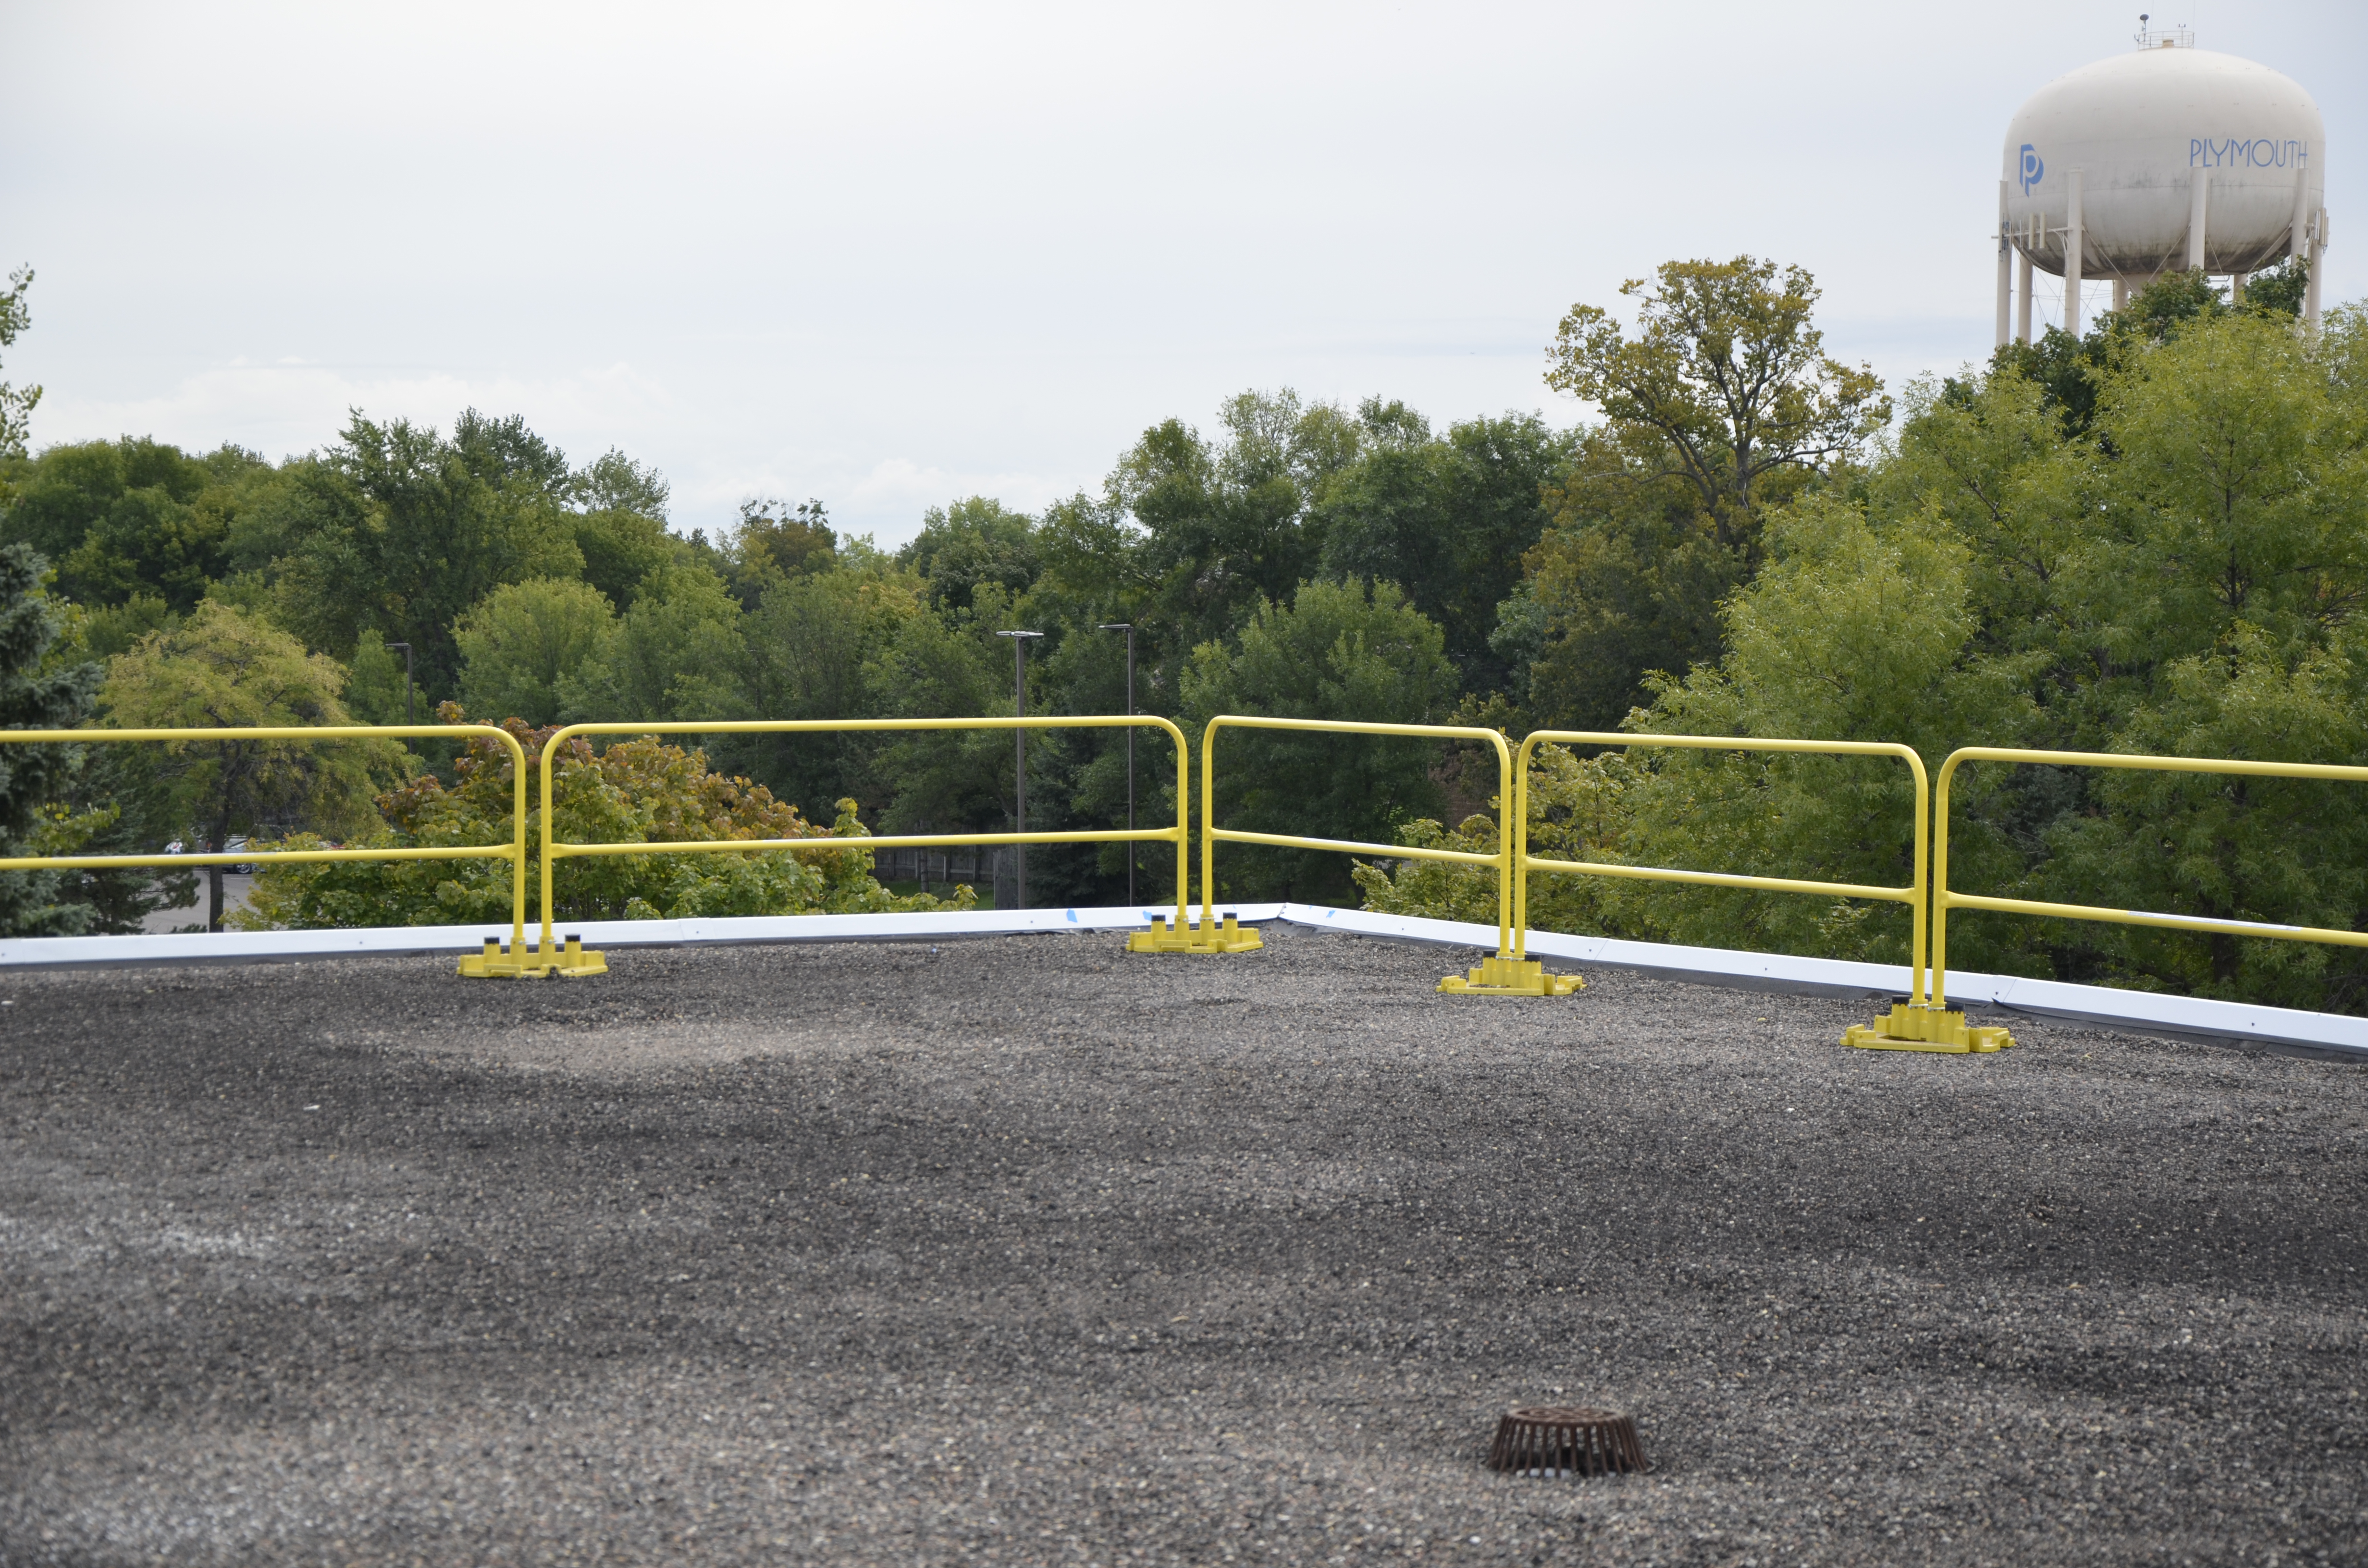 Pre-formed guard rail with metal bases